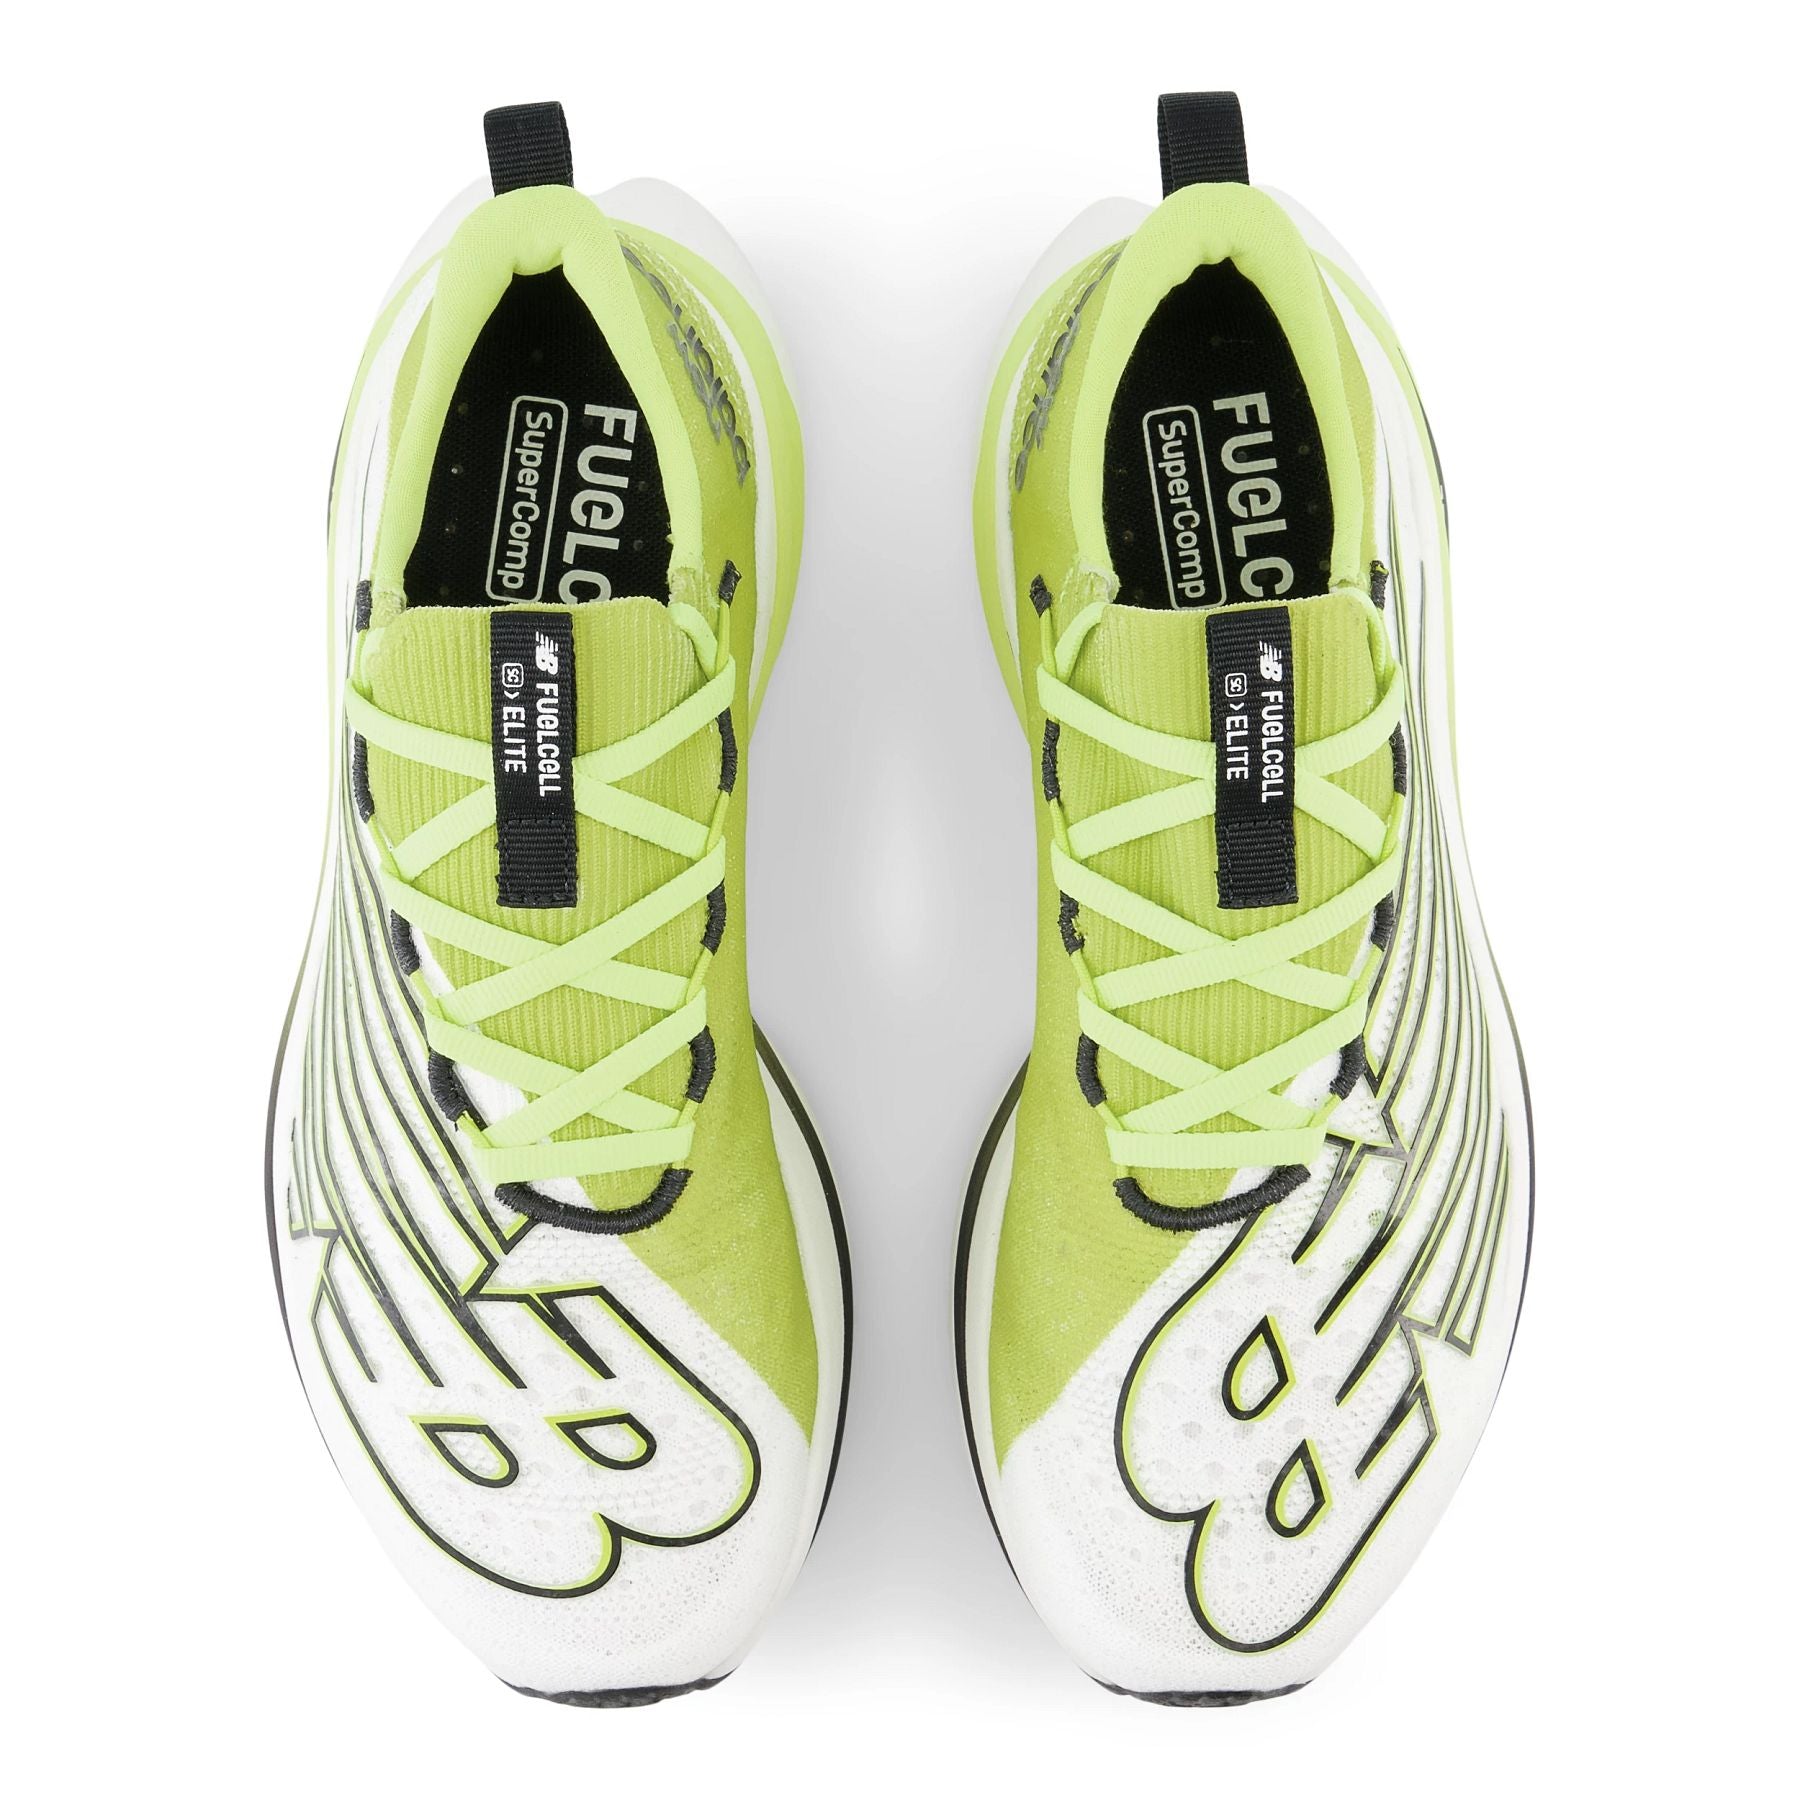 Top view of the Men's Super Comp Elite V3 by New Balance in Thirty Watt/Black/Cosmic Rose